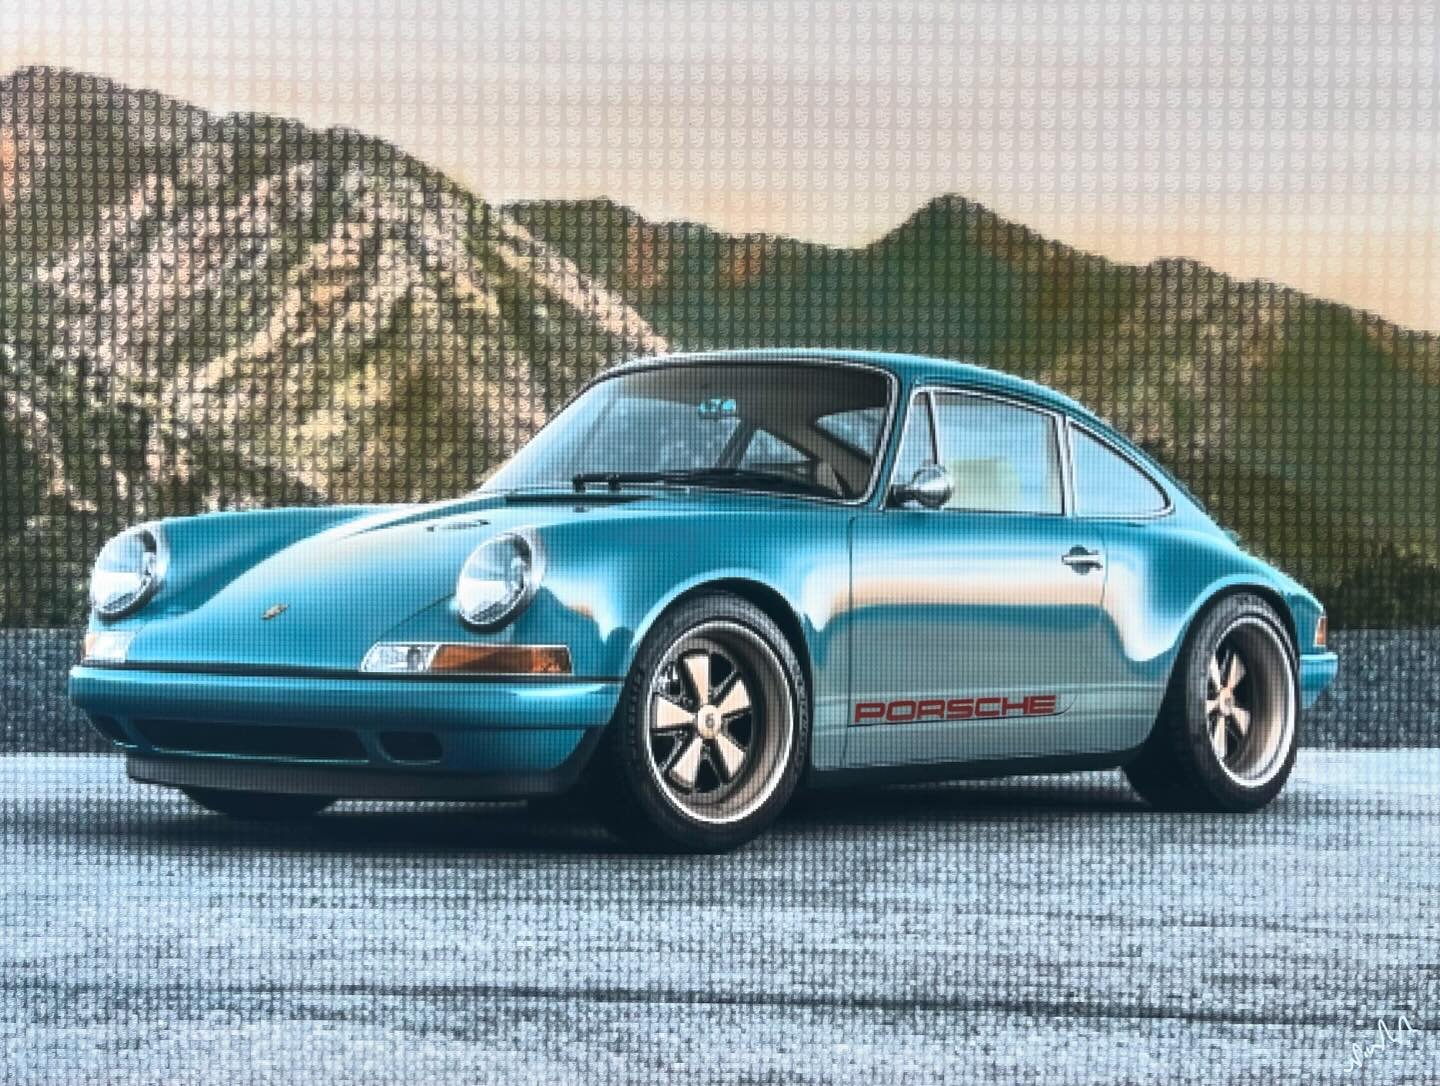 Here&rsquo;s the next piece in my new collection that I want to share with you. What an amazing car! This is a Porsche 911 singer conversion, the detail on these Porsche Singer conversions is insane. I absolutely love everything about this car. Hope 